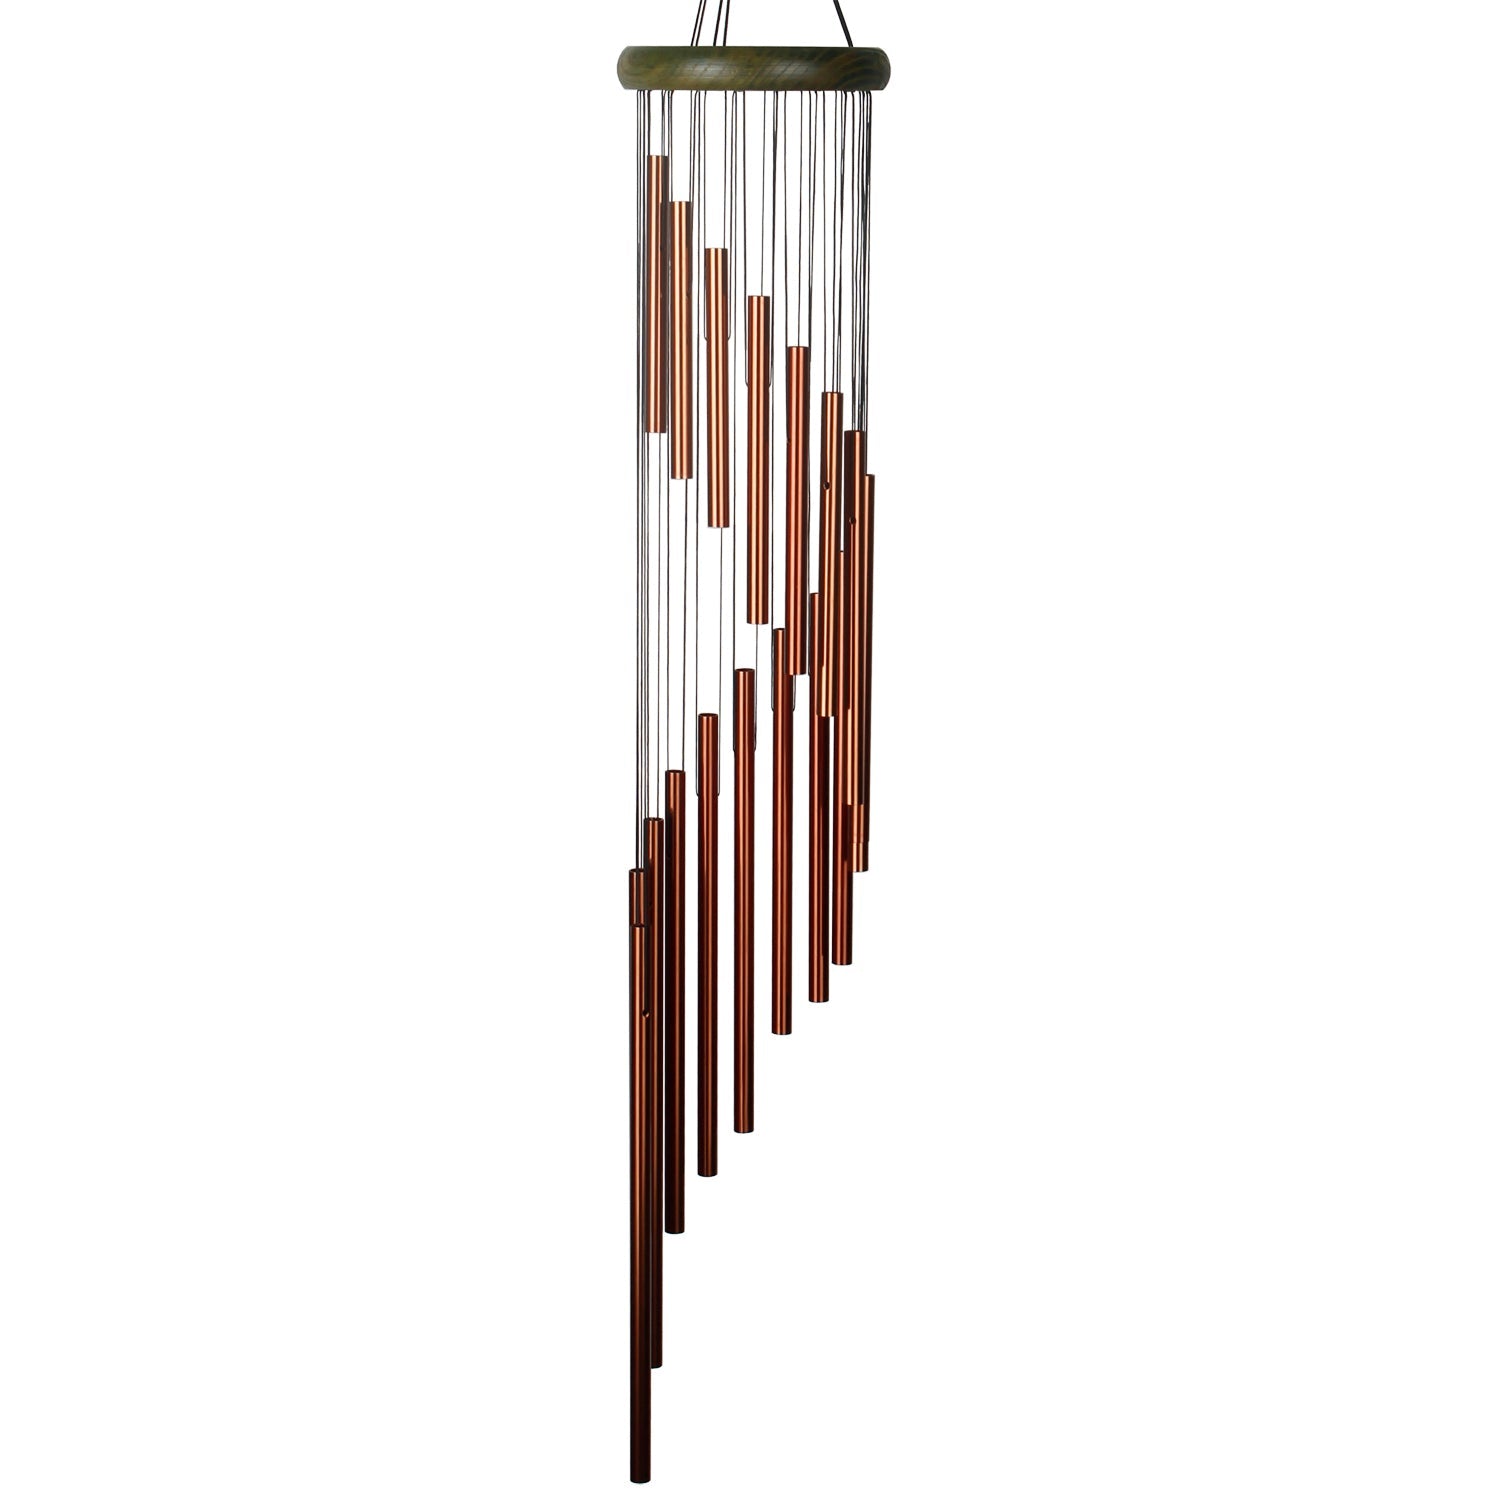 chime on white background.